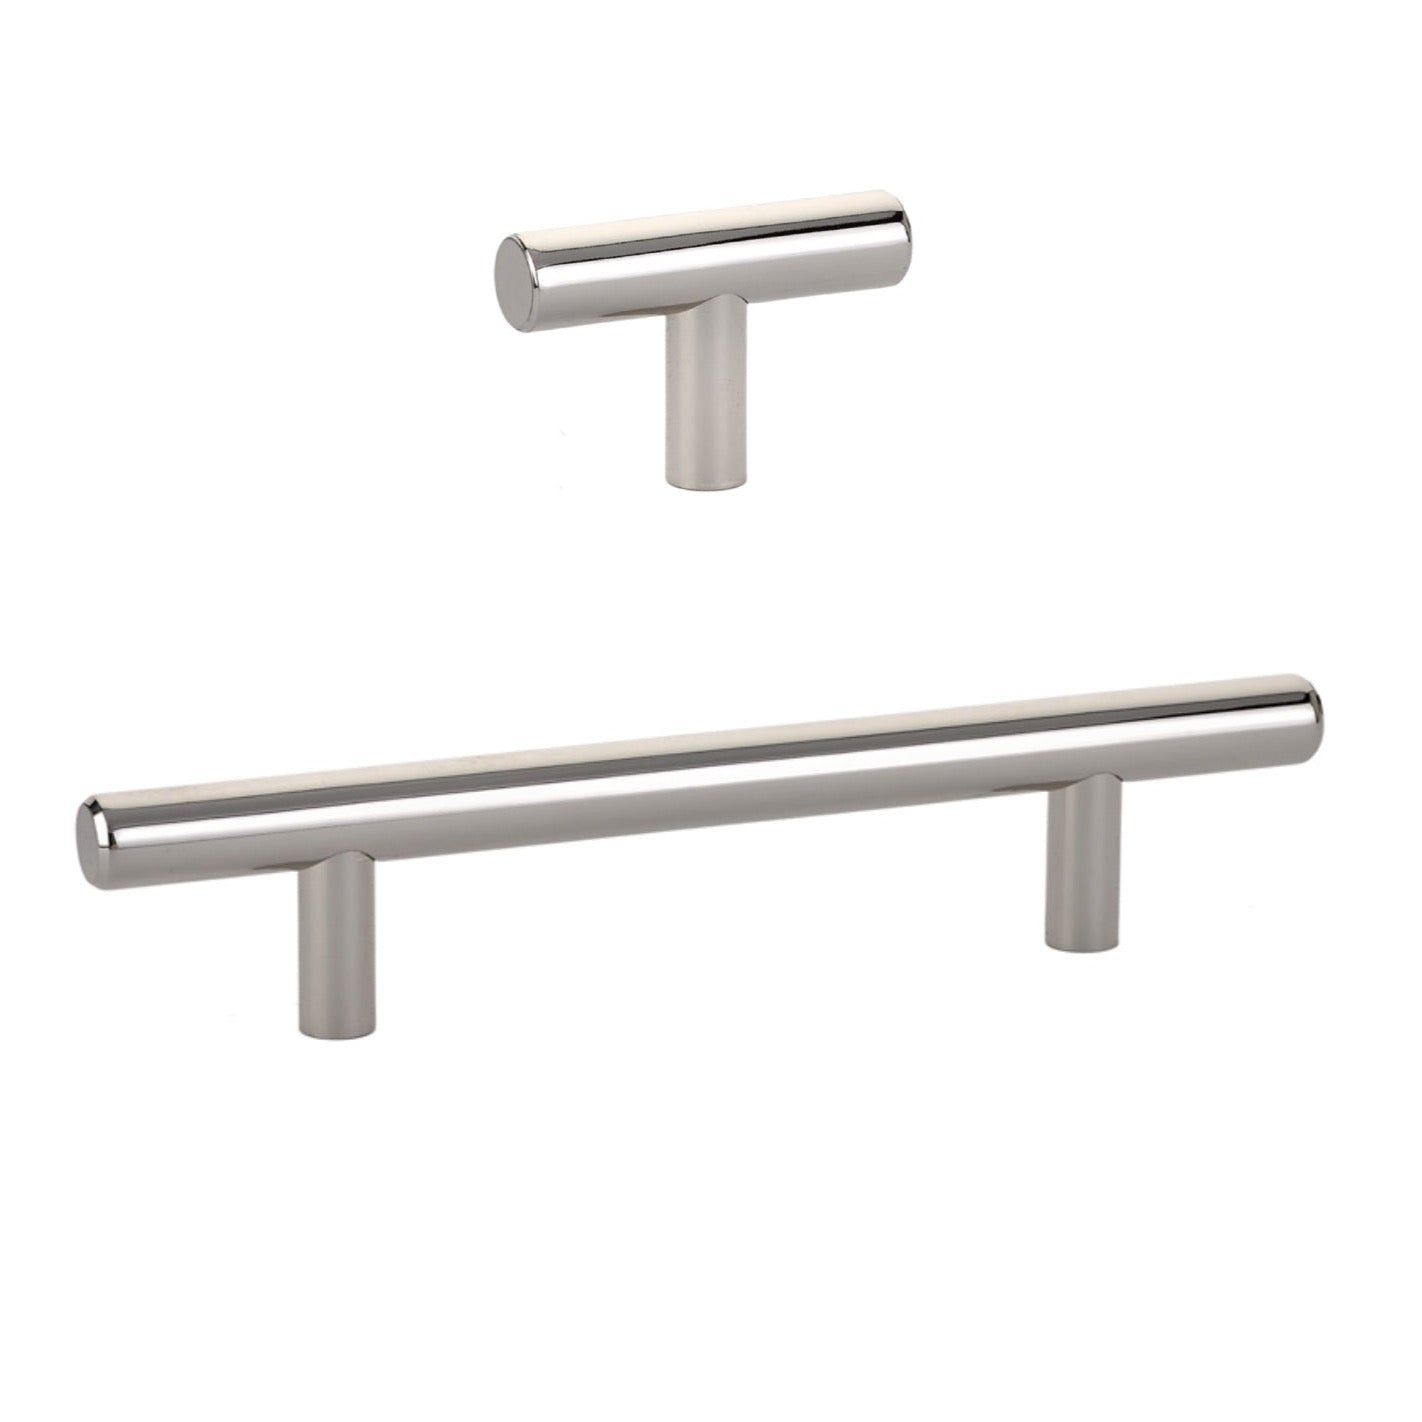 T-Bar "European" Polished Nickel Cabinet Knobs and Pulls - Industry Hardware